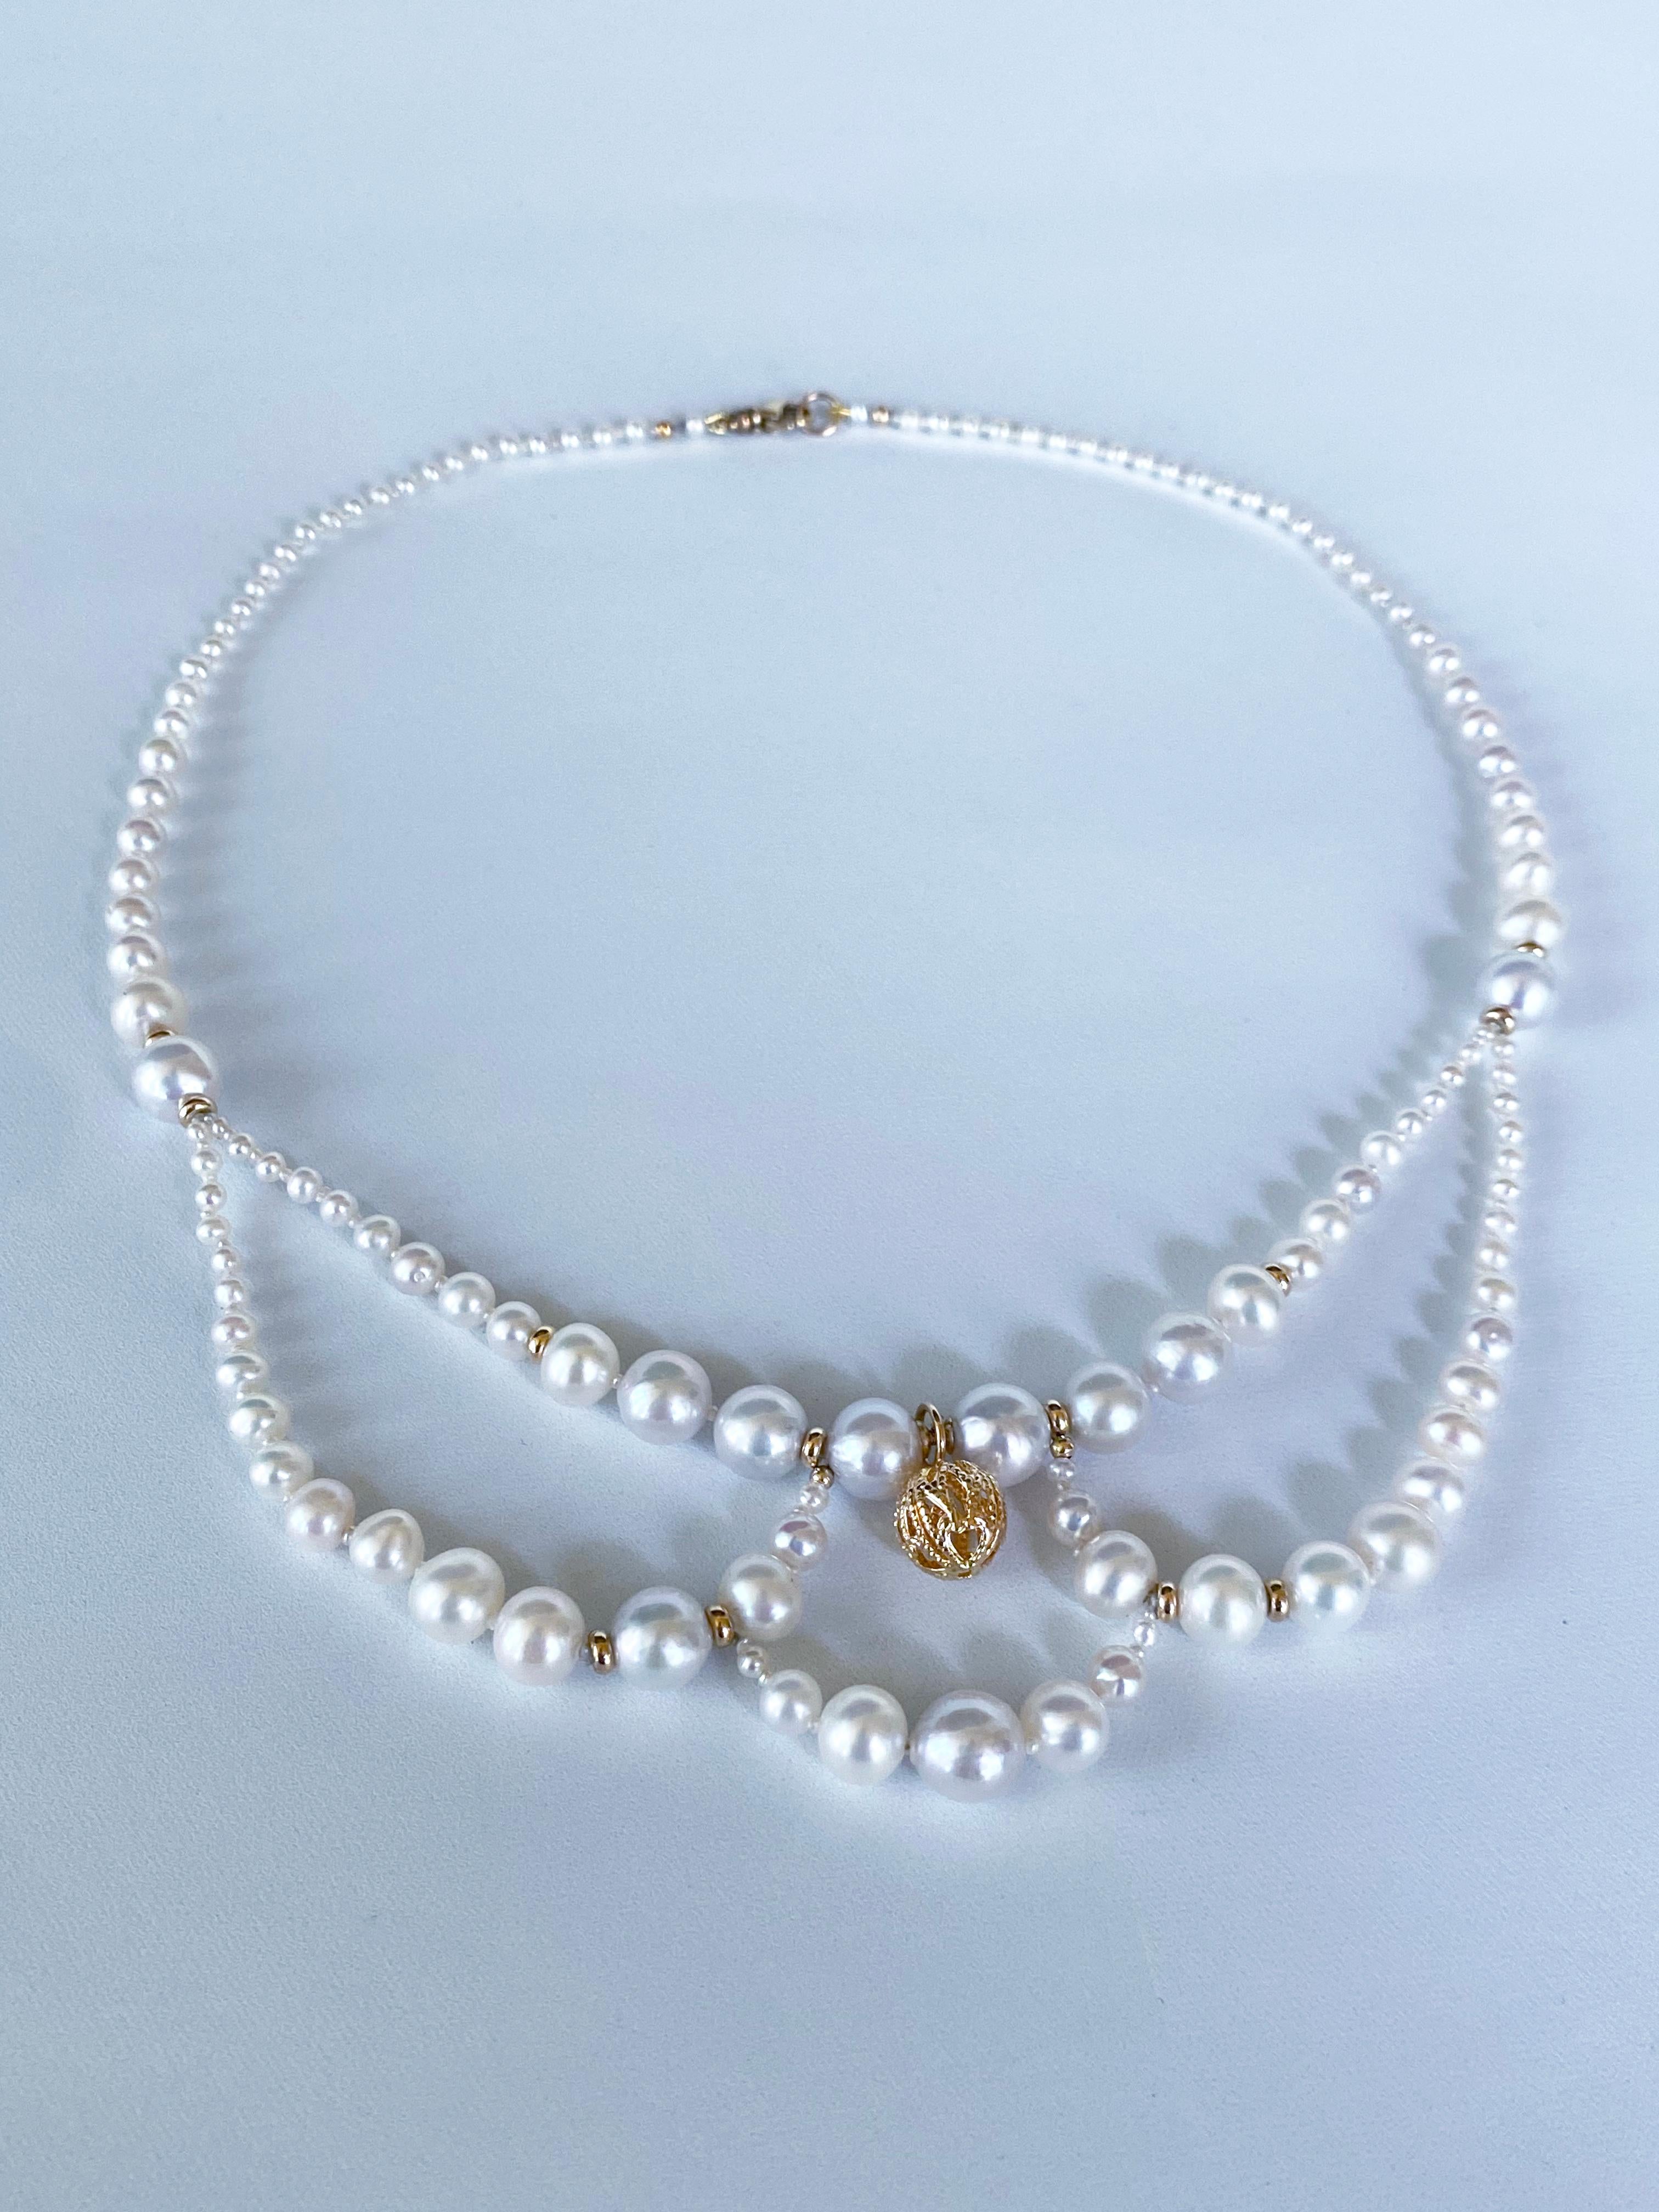 Bead Marina J. Draped Victorian Inspired Pearl & Solid 14k Yellow Gold Necklace For Sale